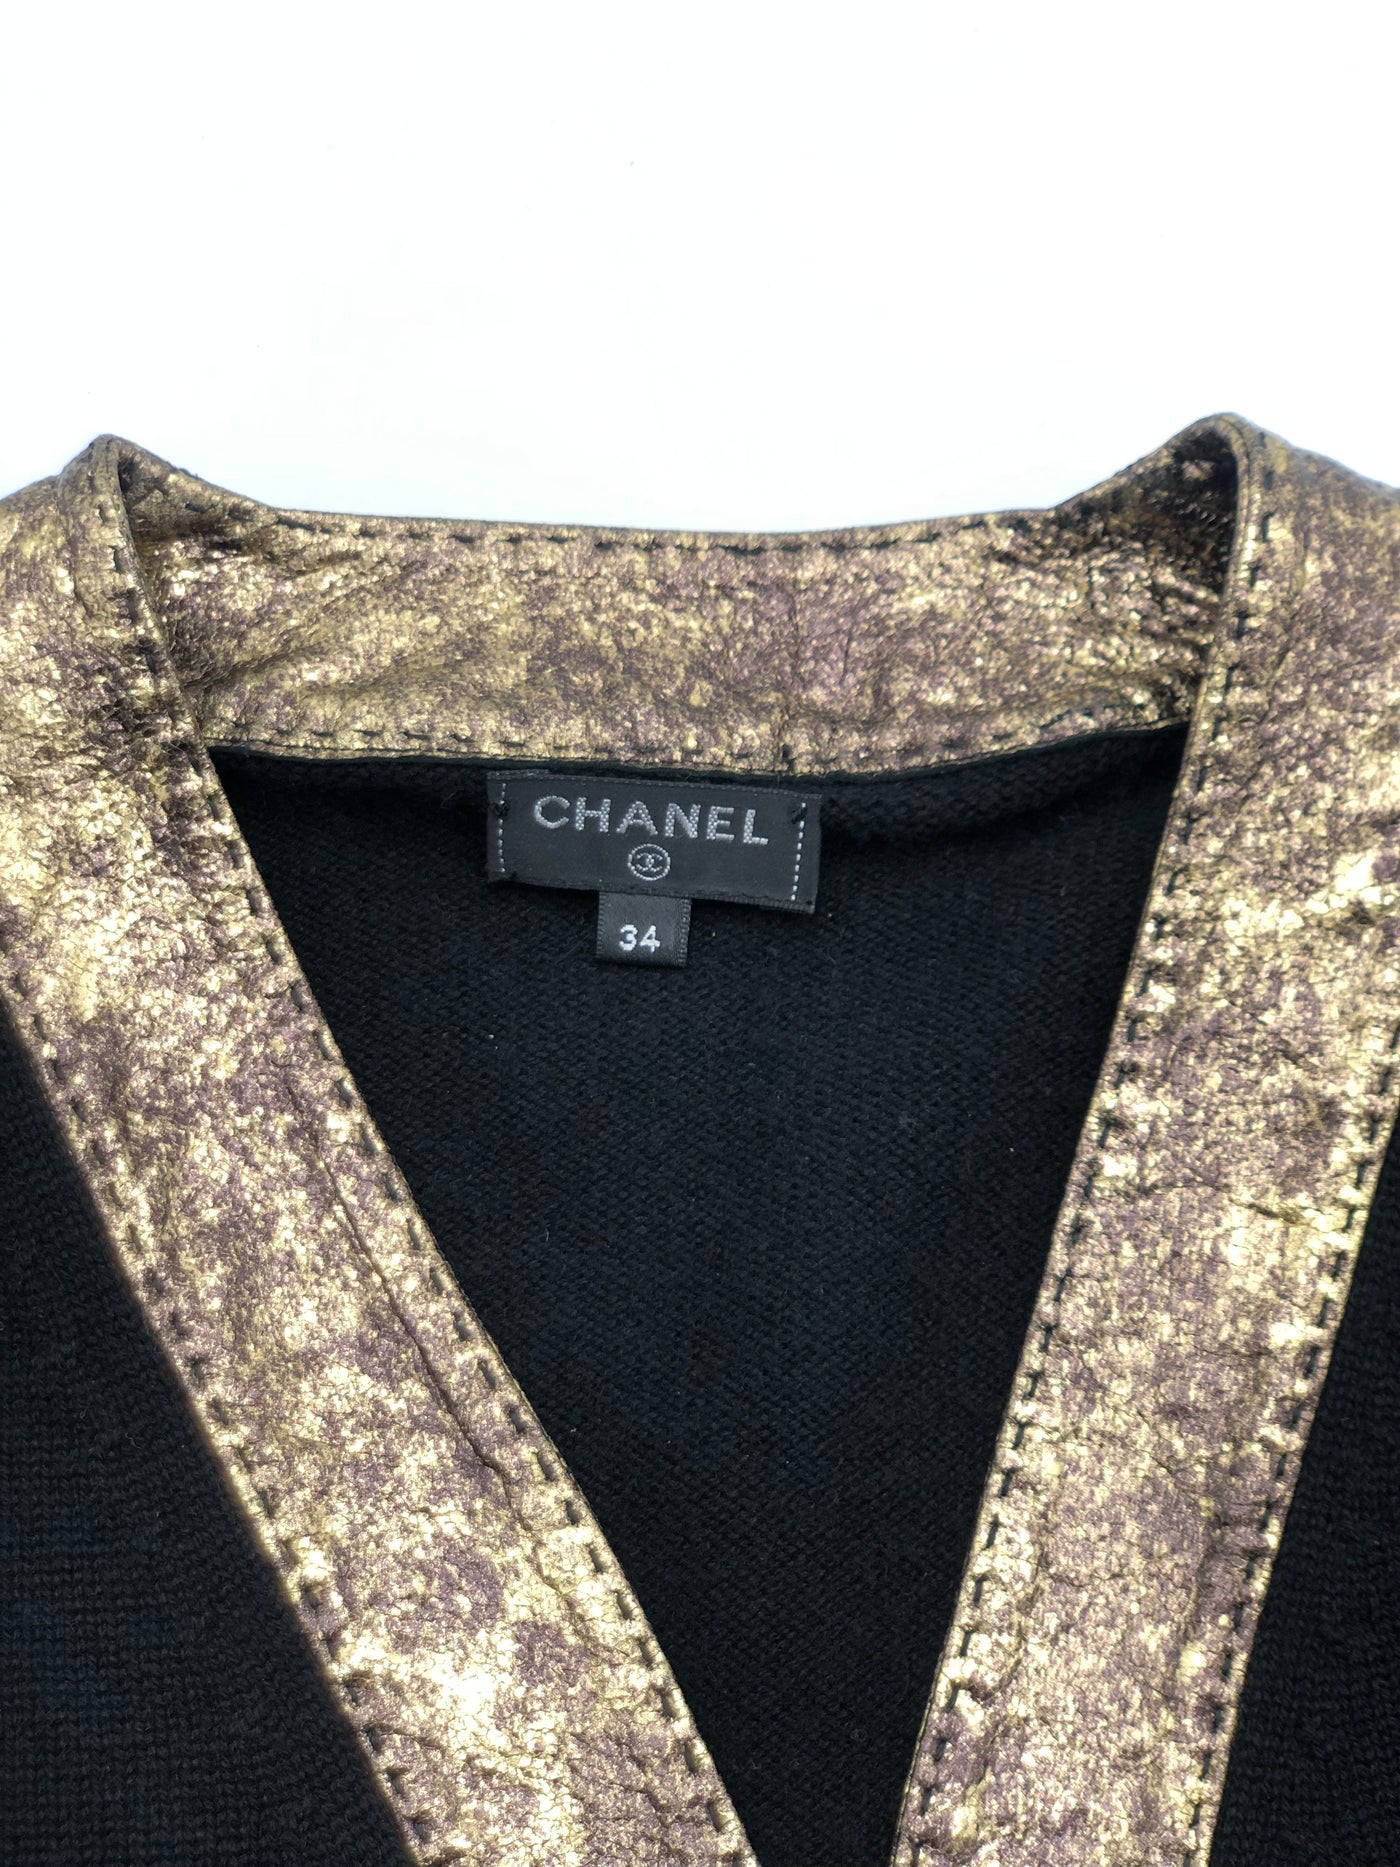 CHANEL Cashmere Cardigan Jacket with gold trim size 34